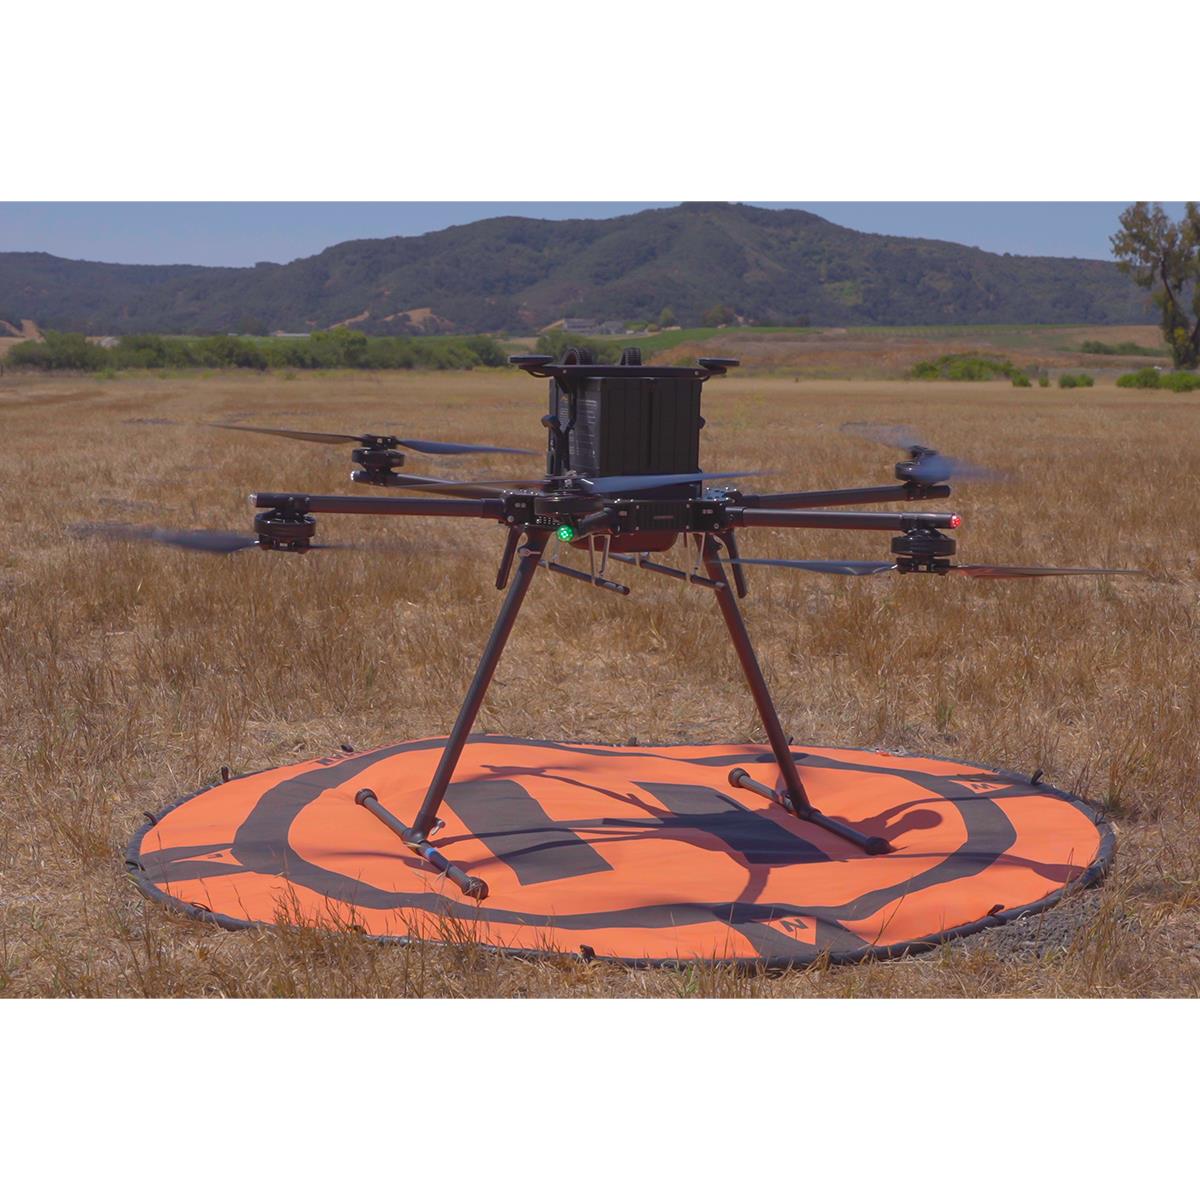 Inspired Flight IF1200A Drone - Blue Herelink